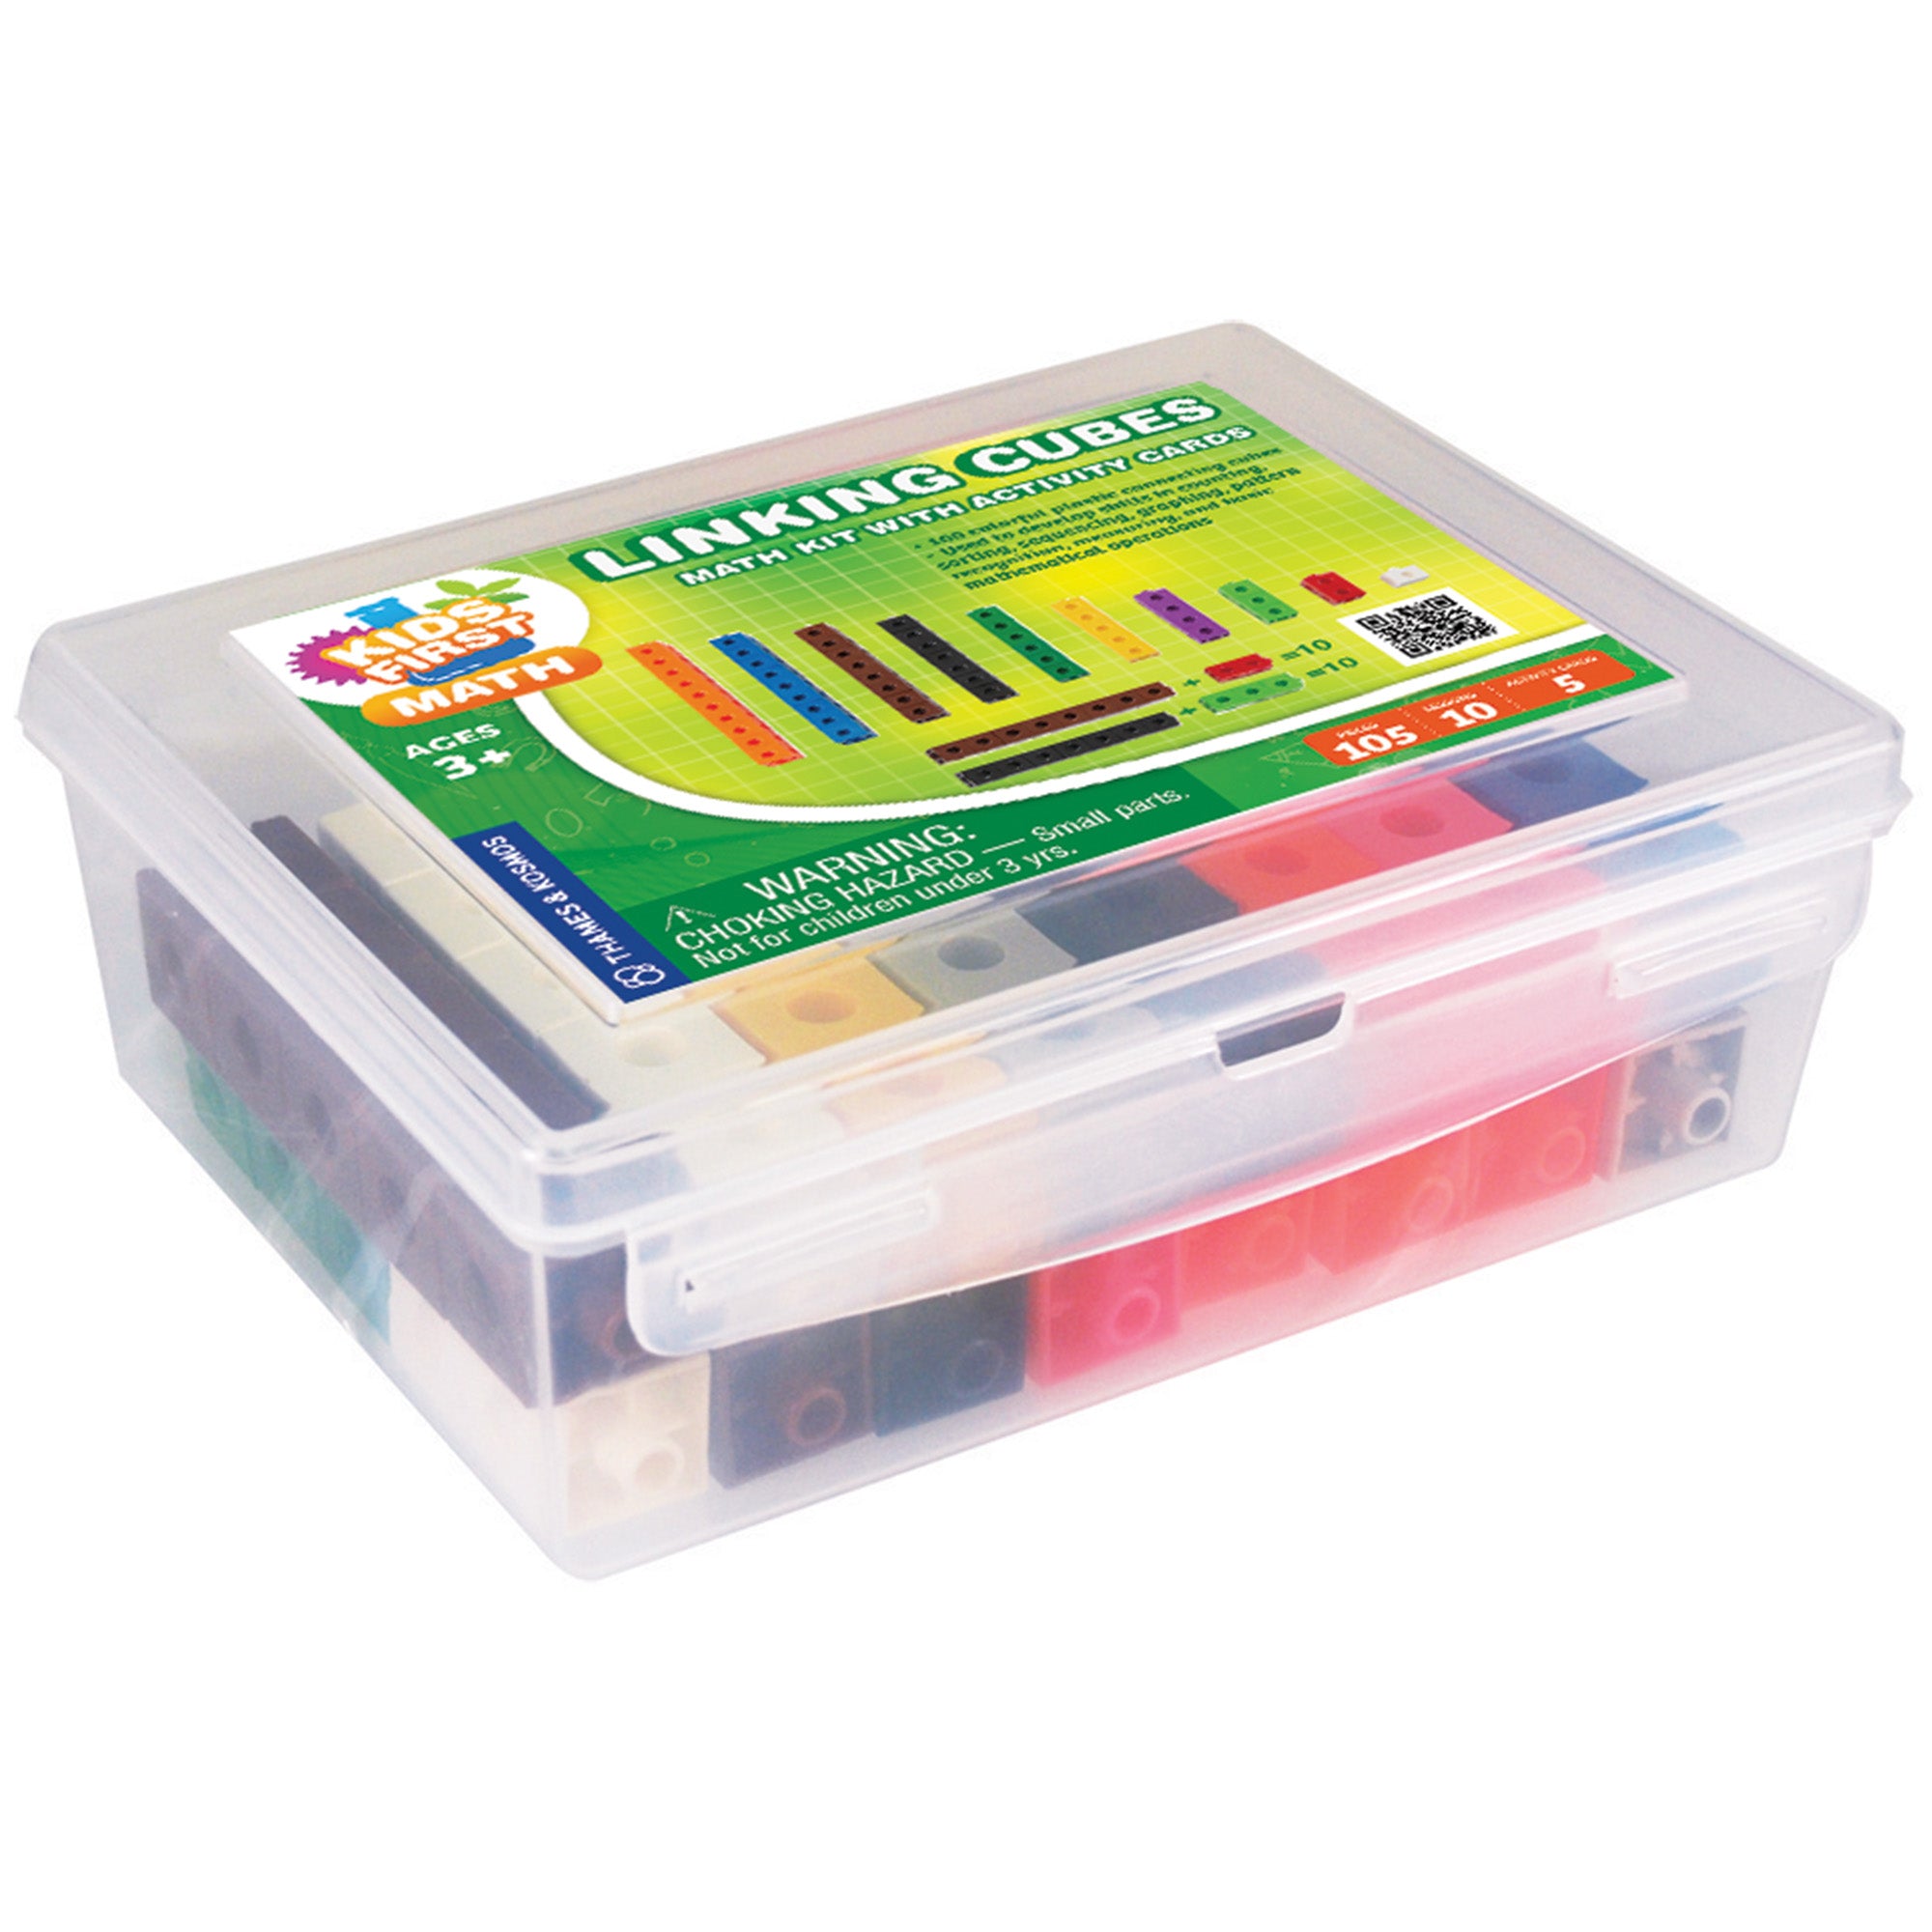 Linking Cubes Math Kit With Activity Cards    